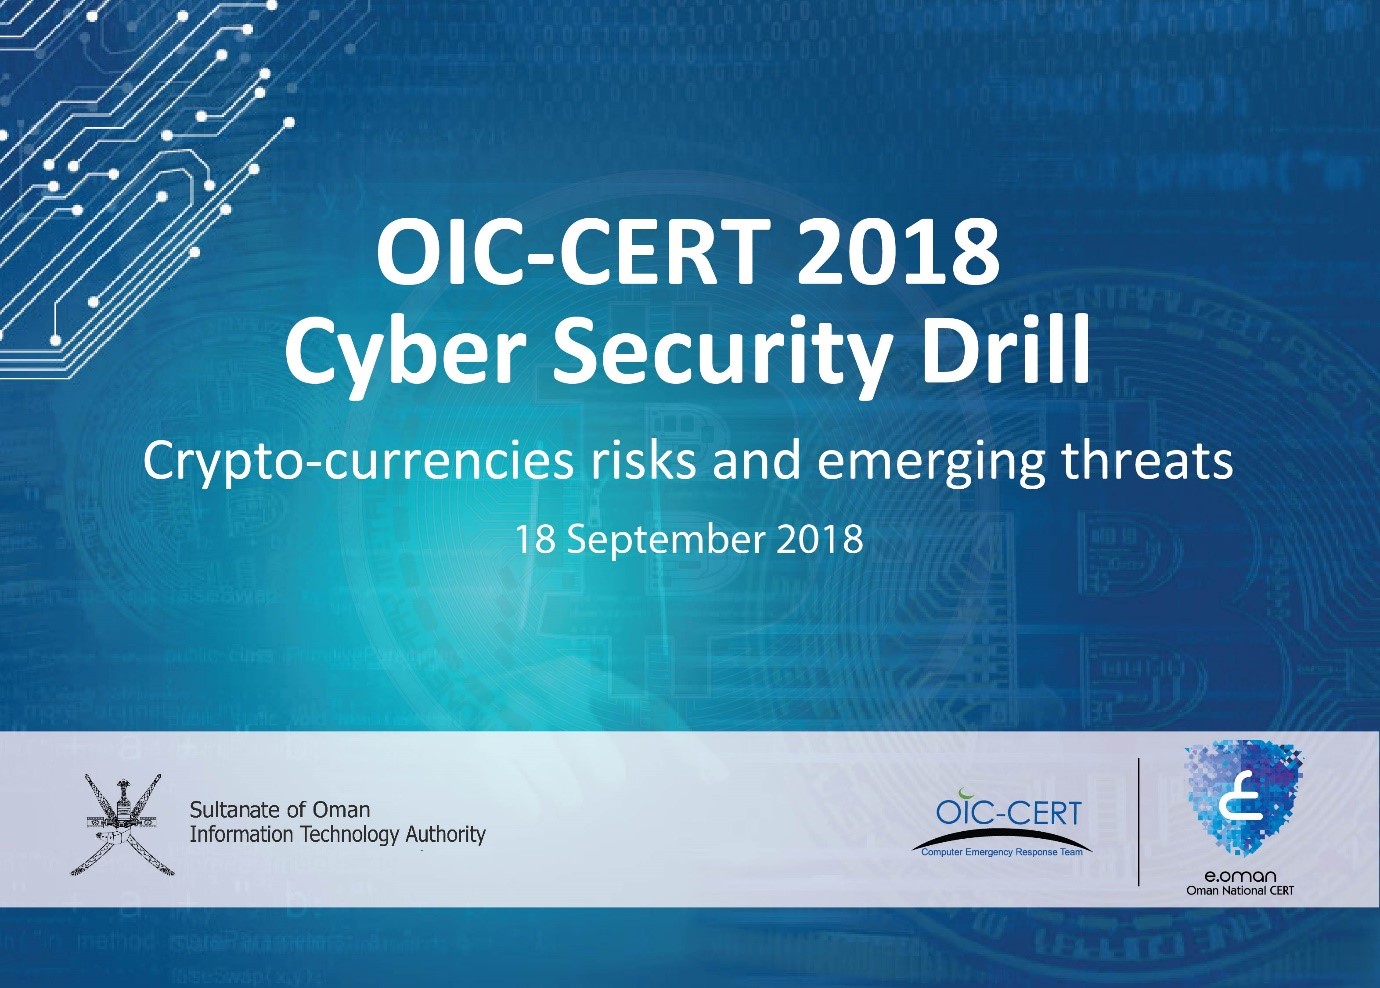 BGD e-GOV CIRT has successfully participated on OIC-CERT Cybersecurity Drill – 2018 with 75% Score